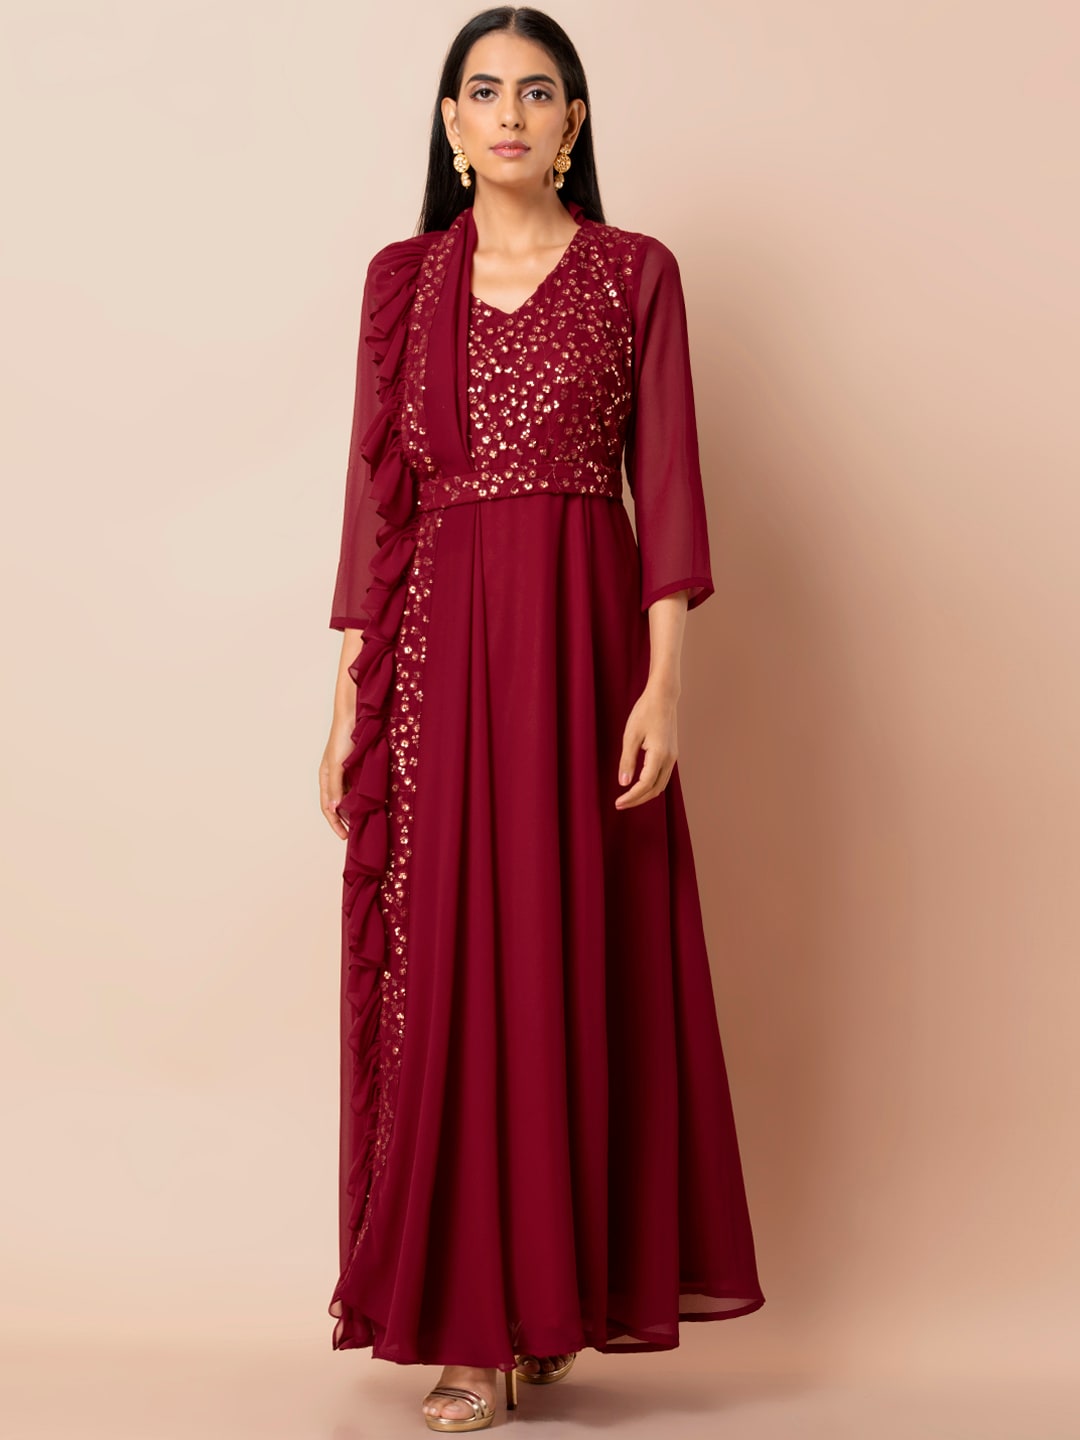 INDYA Women Maroon Belted Anarkali Dress with Attached Dupatta Price in India